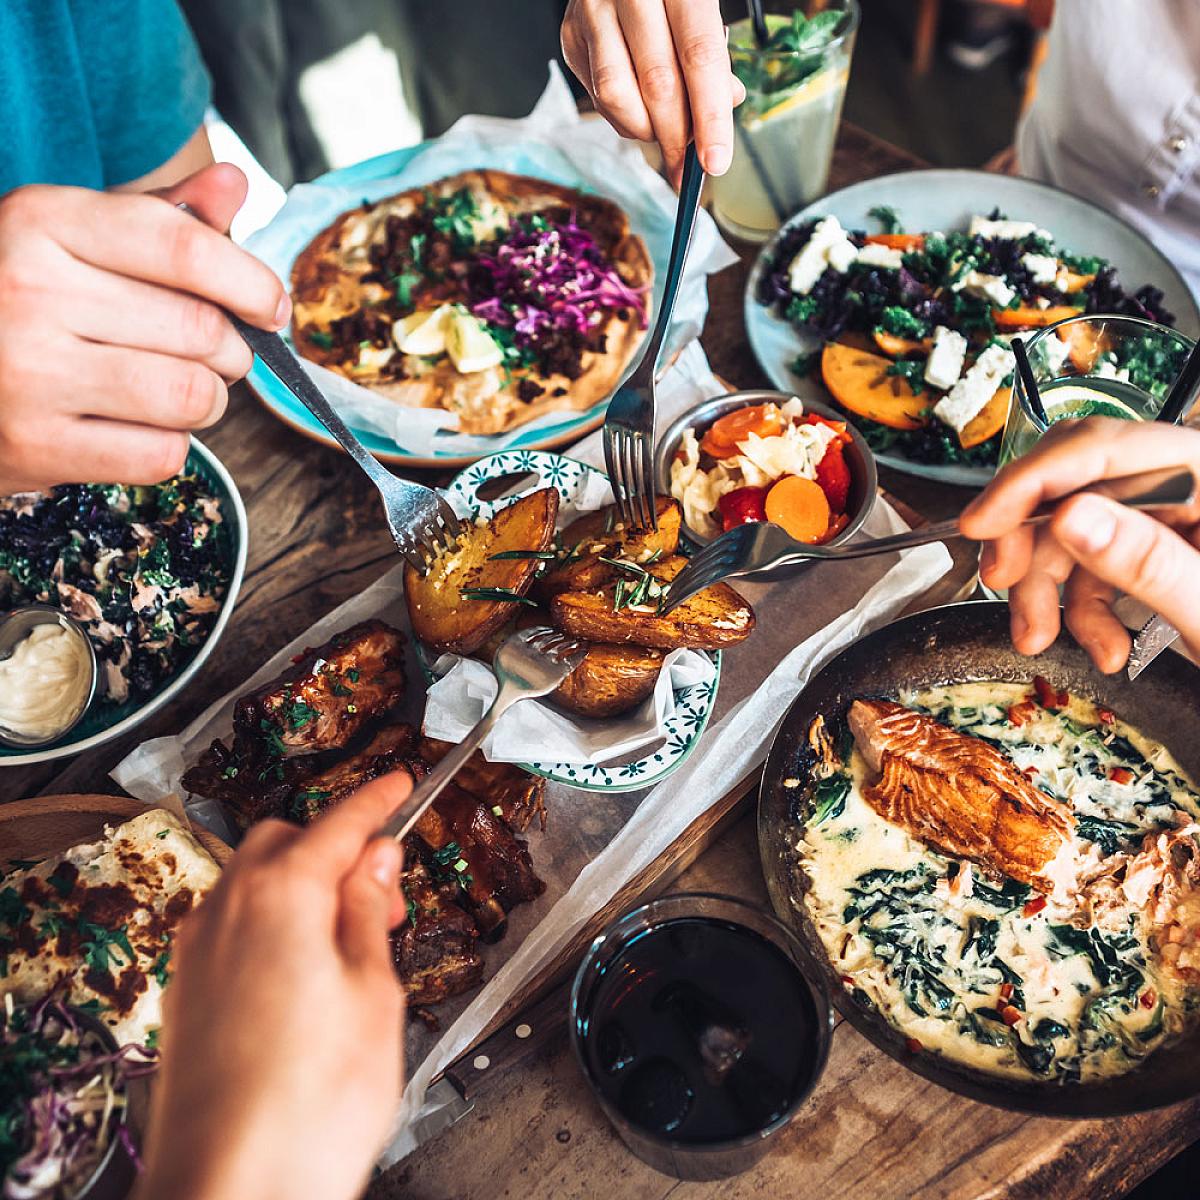 A wooden table full of food. Four separate hands reach in from the corners of the photo with utensils.